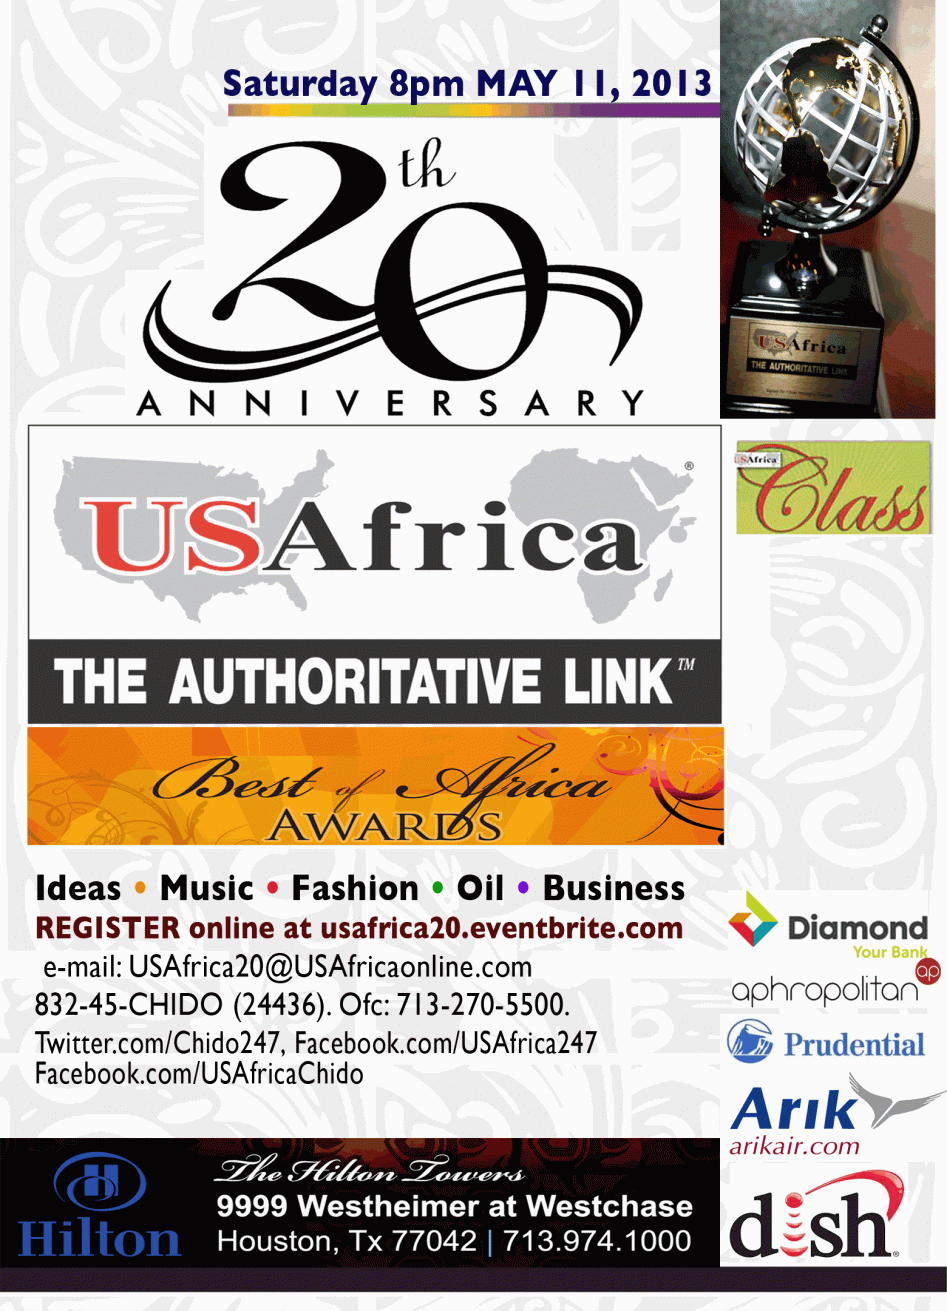 USAfrica 20th ANNIVERSARY and BEST of Africa Awards on Sat May 11, 2013 in Houston